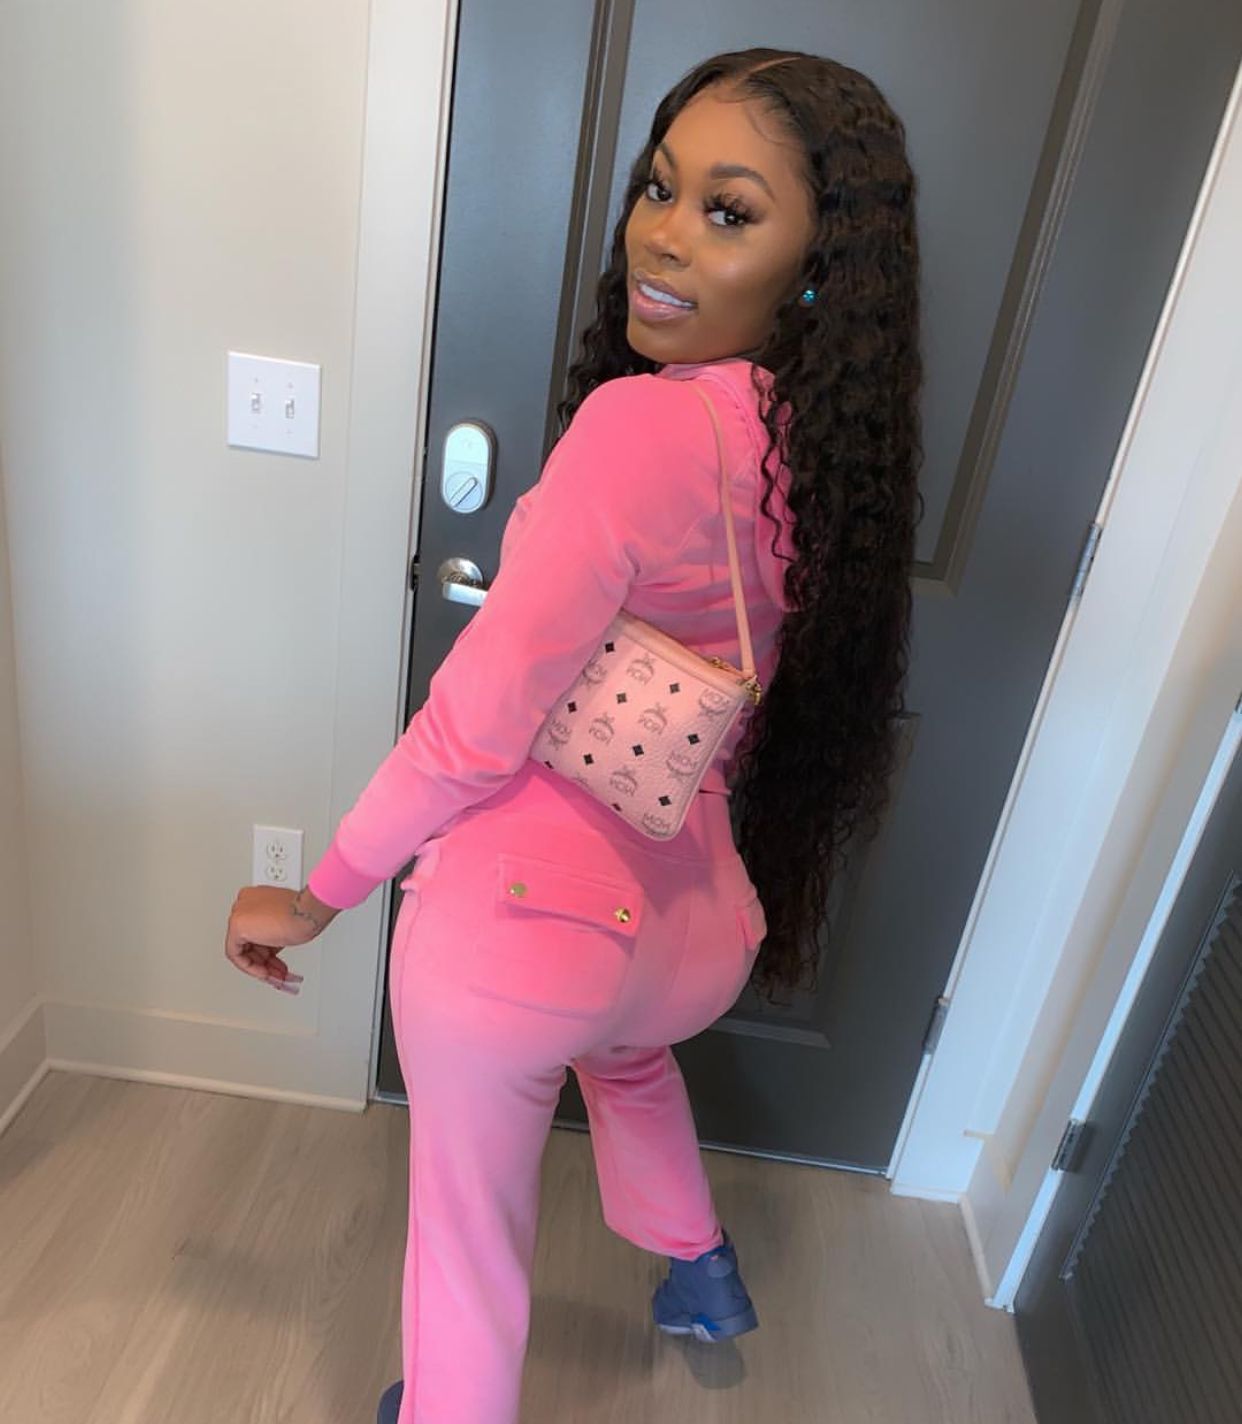 amanda gehling recommends Asian Doll Nude